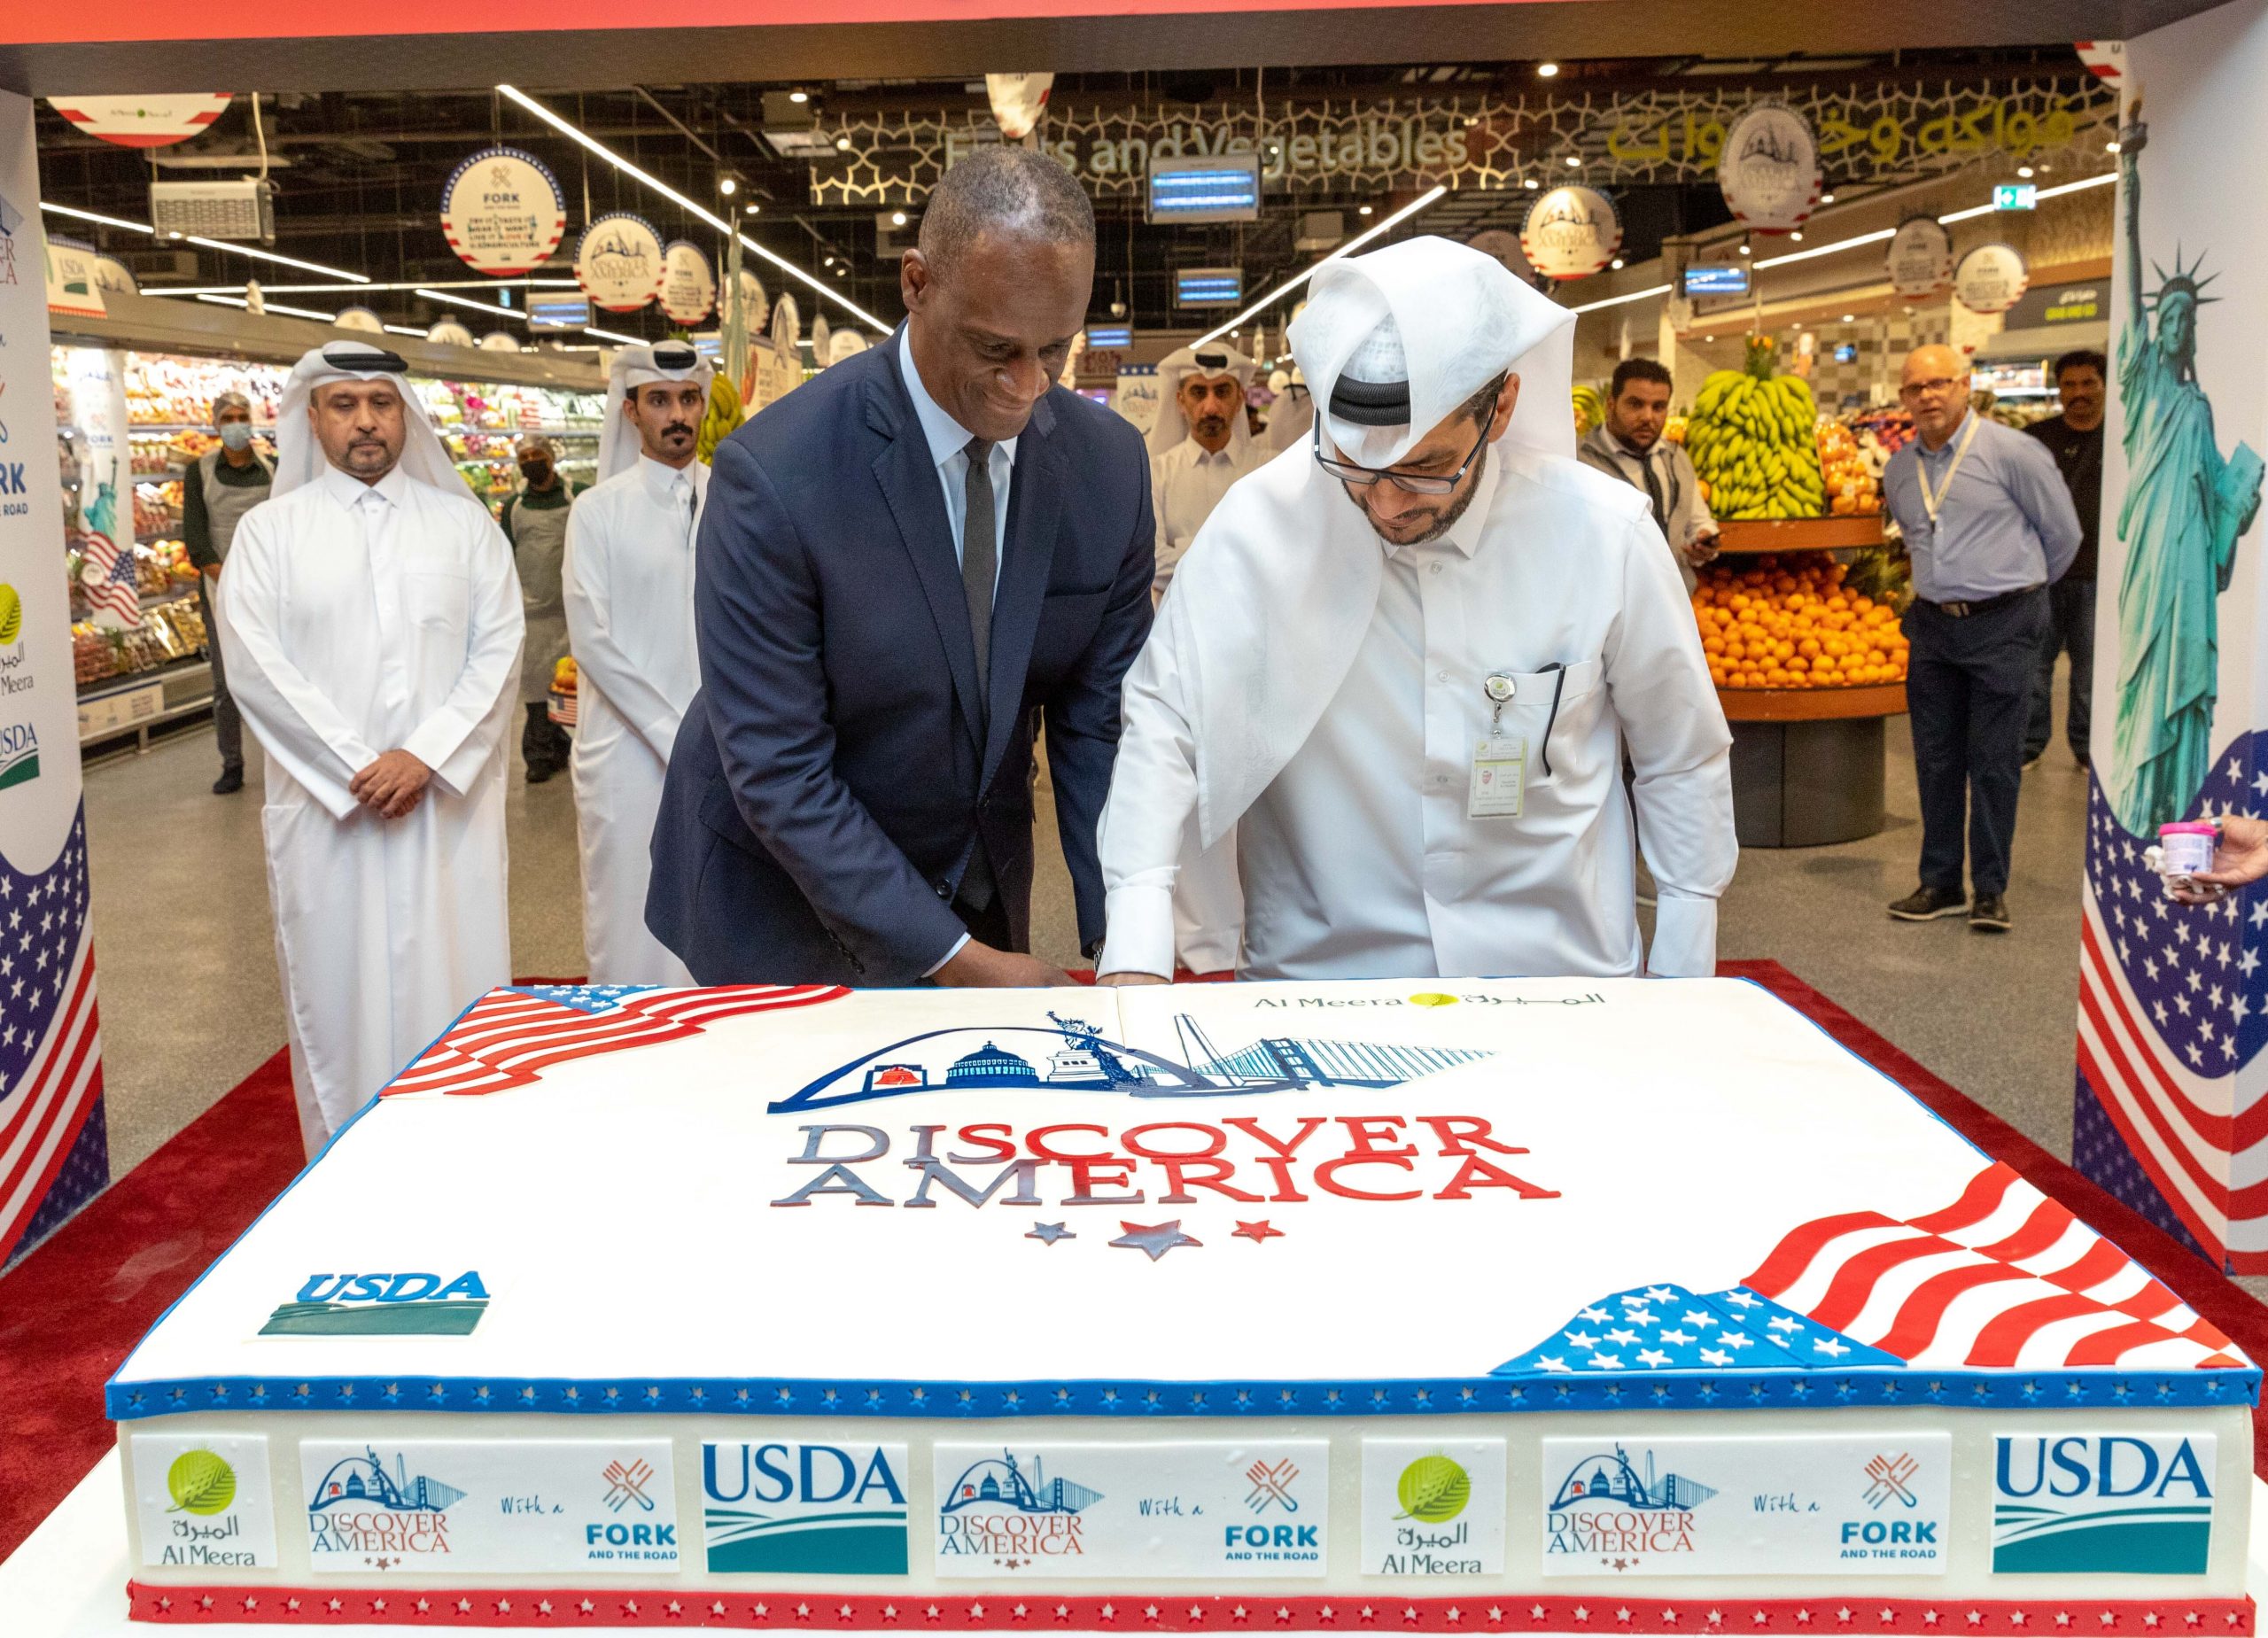 Al Meera Launches ‘Discover America with a Fork and the Road’ Campaign across Selected Branches in Partnership with United States Department of Agriculture